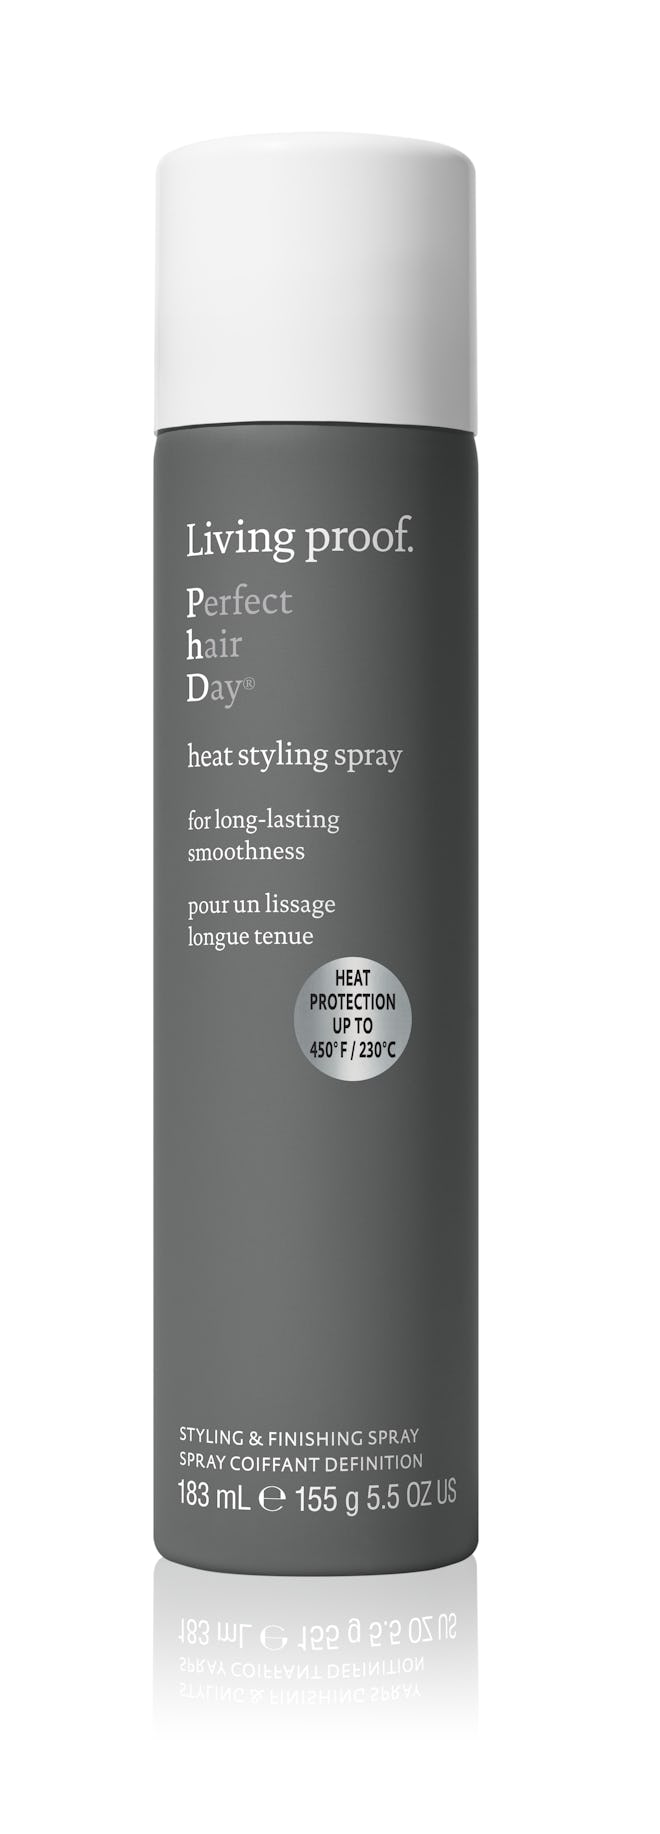 Living Proof Perfect hair Day™ Heat Styling Spray 